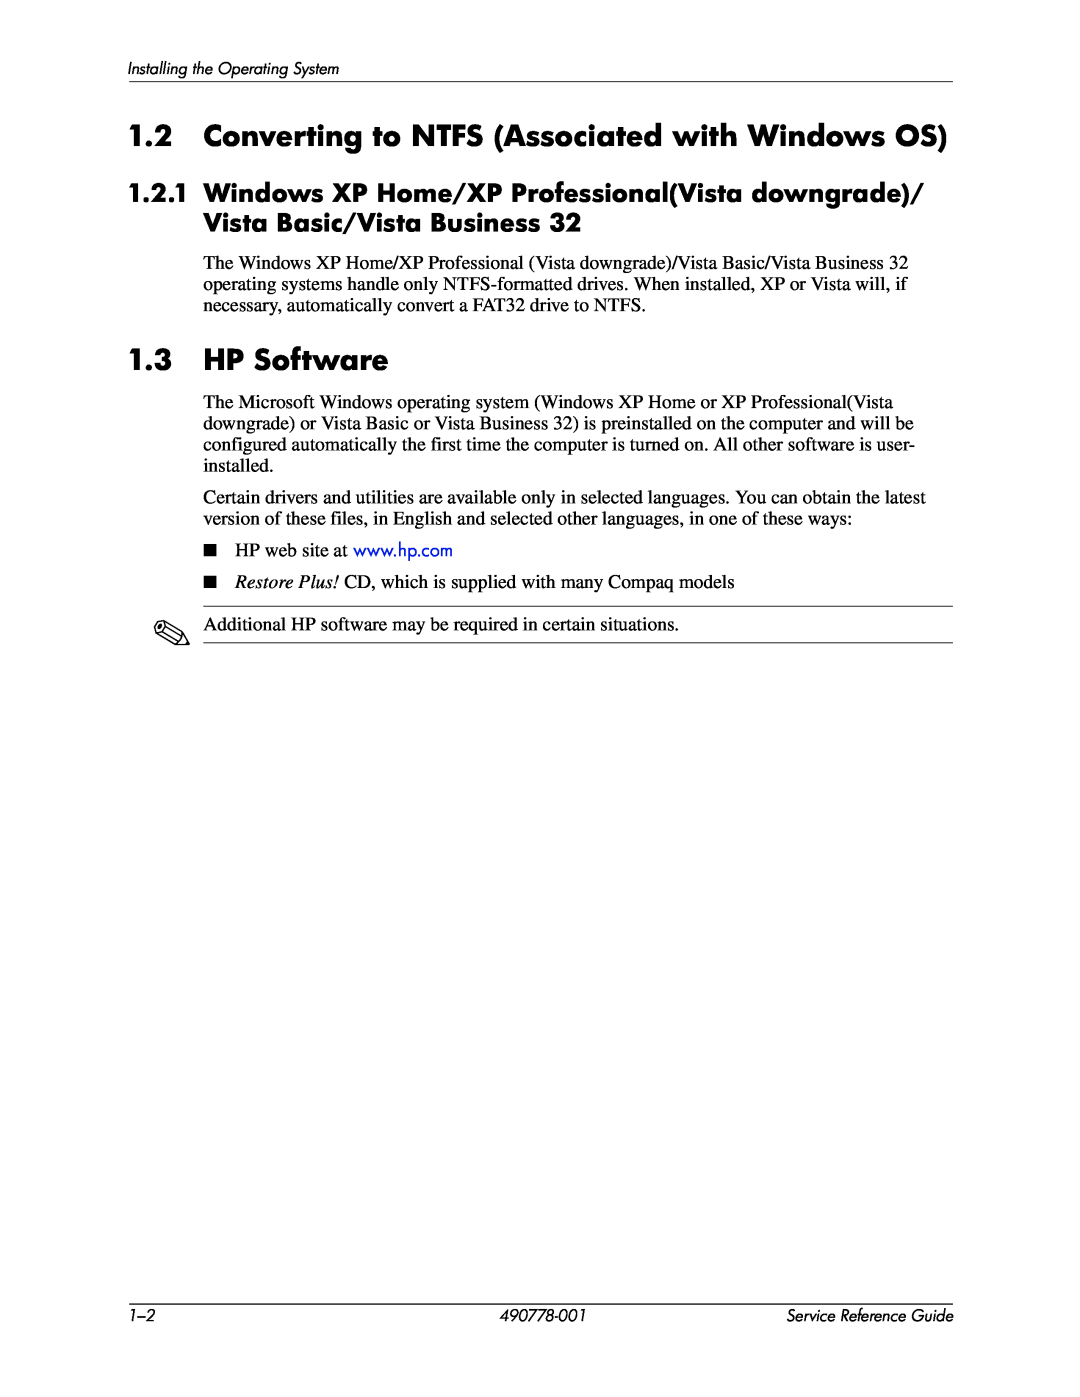 HP dx2310 manual Converting to NTFS Associated with Windows OS, HP Software 